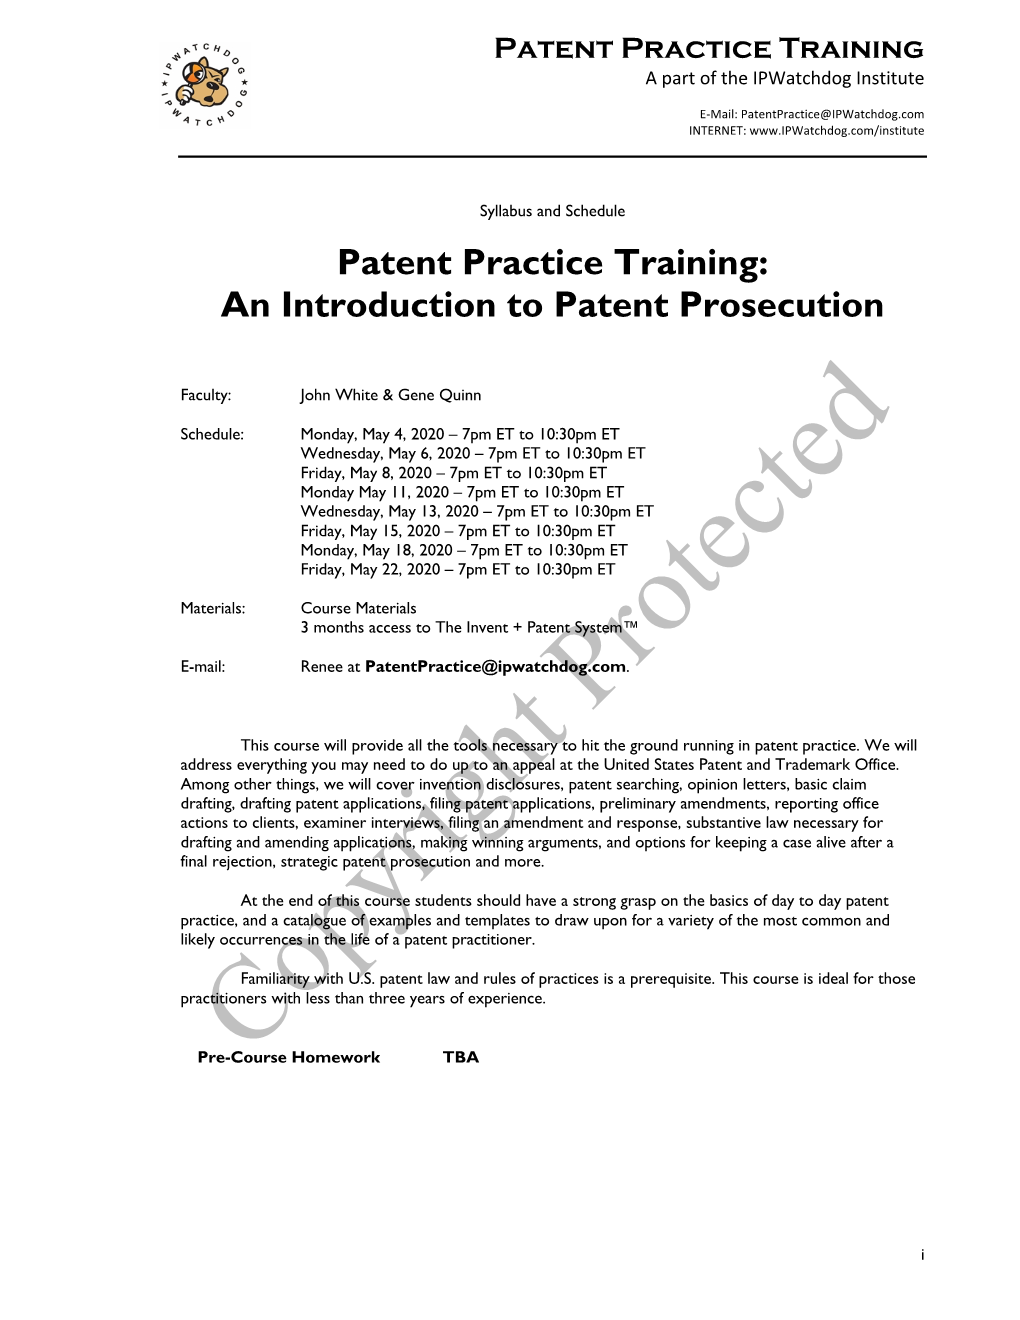 An Introduction to Patent Prosecution